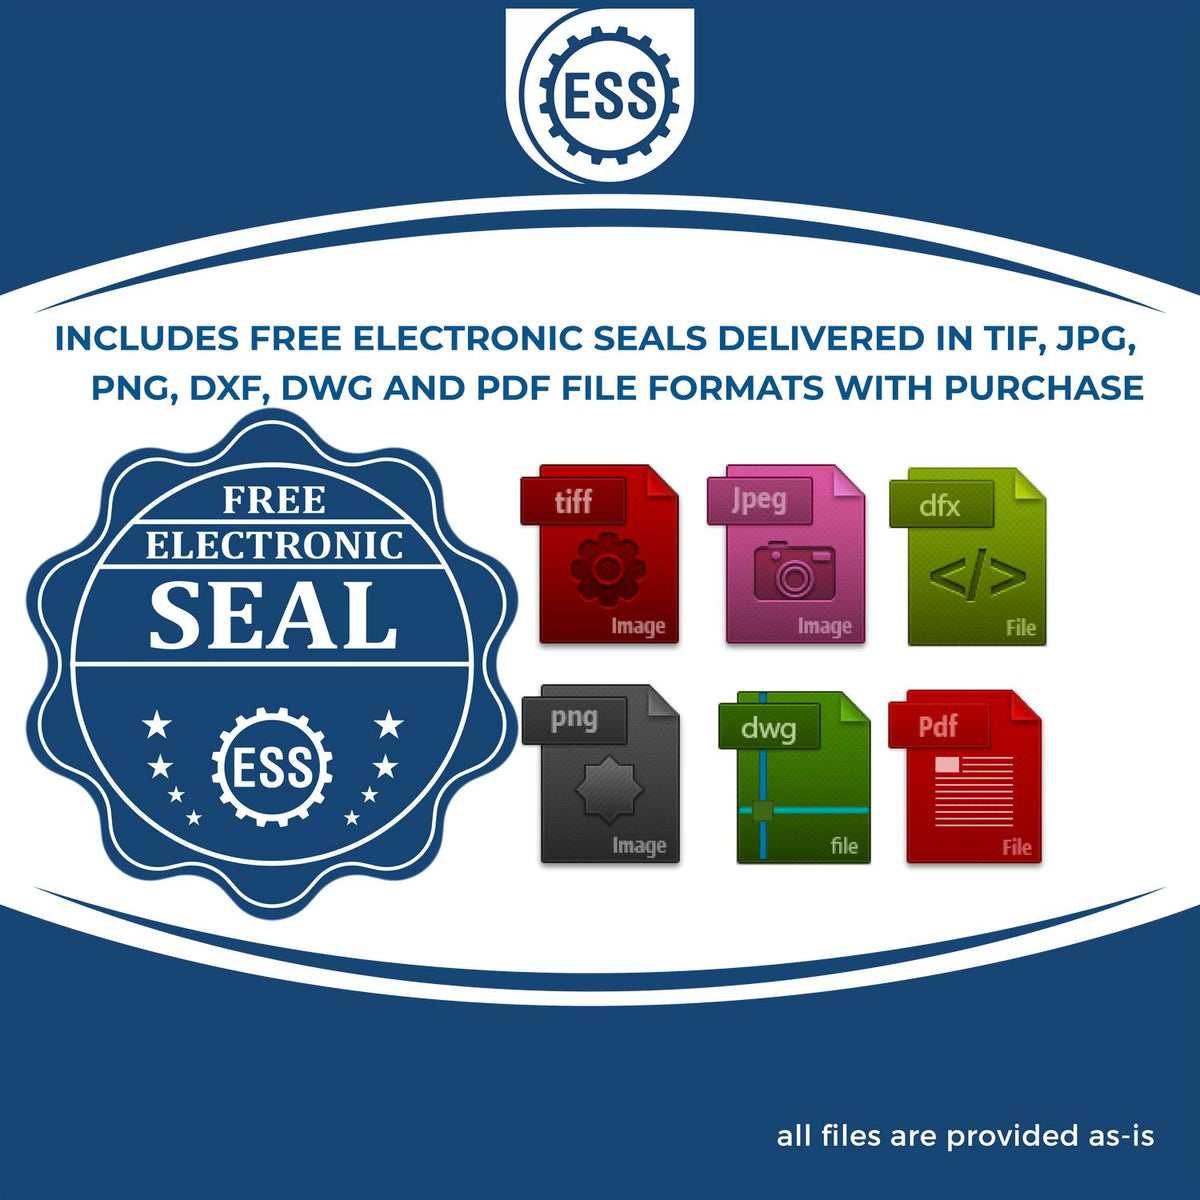 An infographic for the free electronic seal for the Premium MaxLight Pre-Inked Alabama Engineering Stamp illustrating the different file type icons such as DXF, DWG, TIF, JPG and PNG.